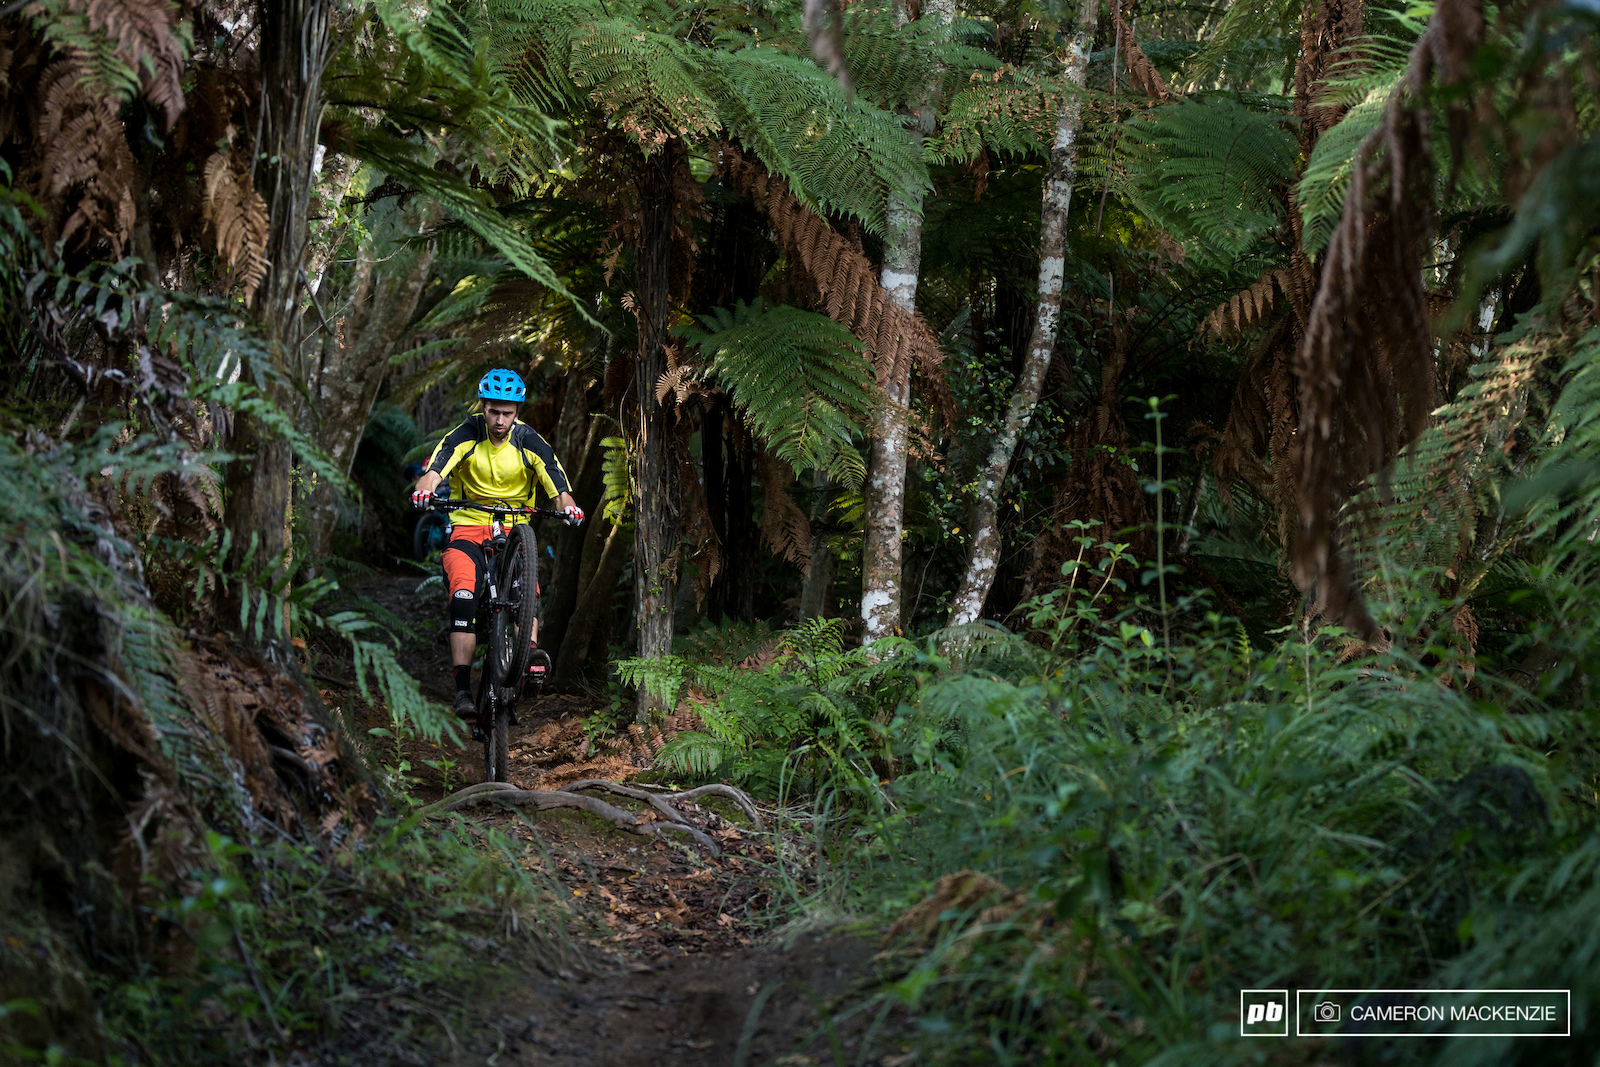 Images from the JustMTB Native North Tour